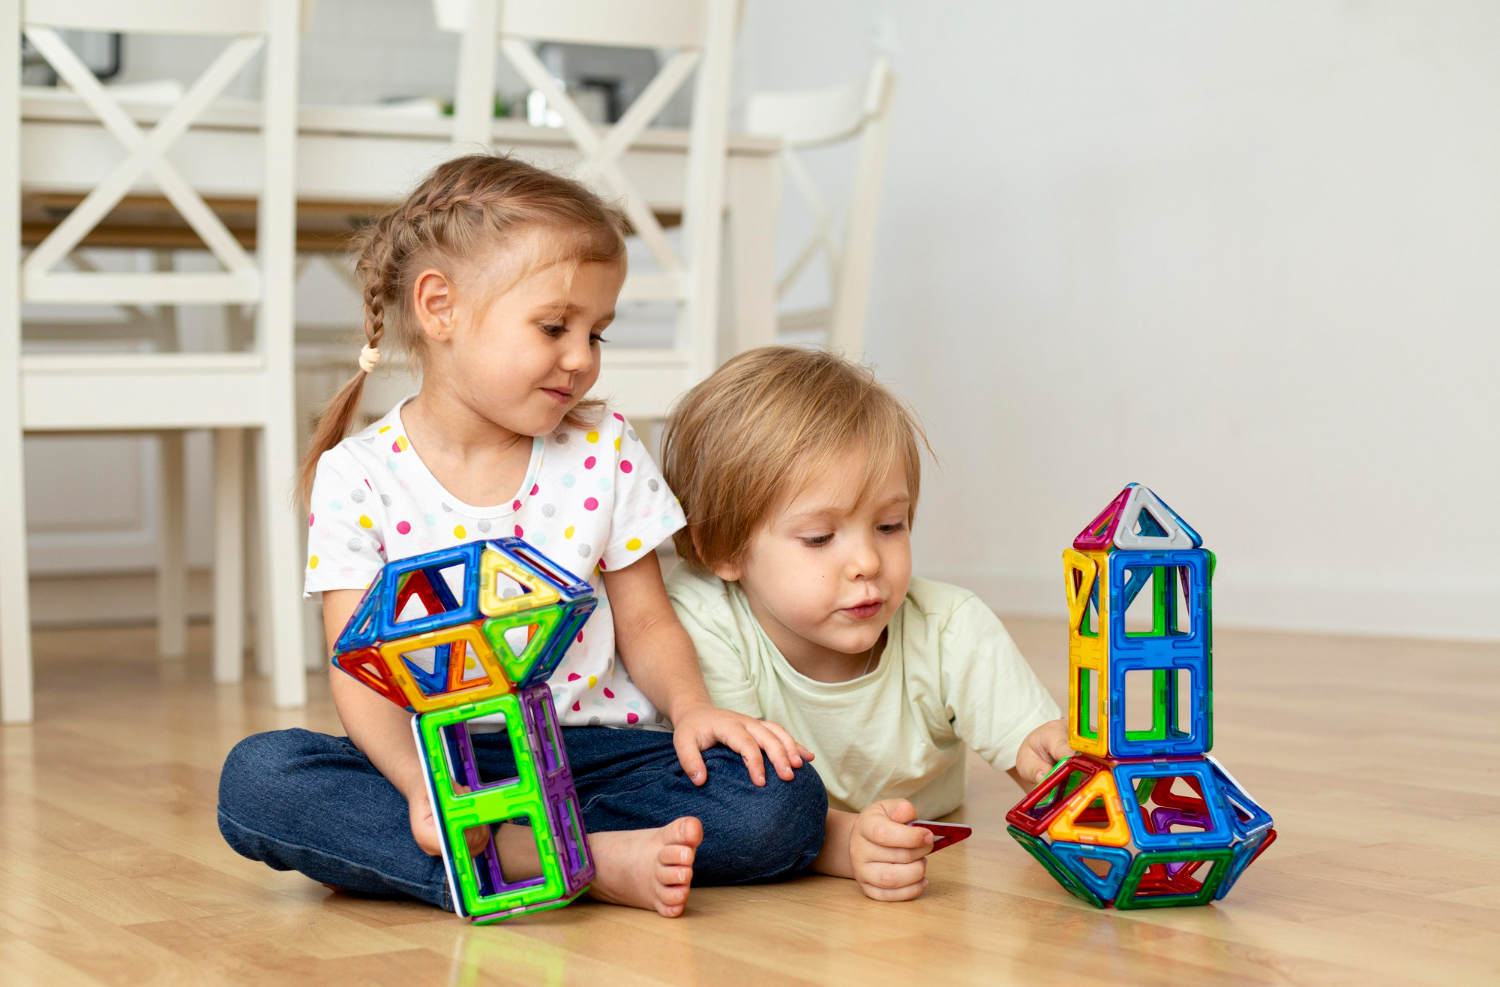 Image of children playing with toys together